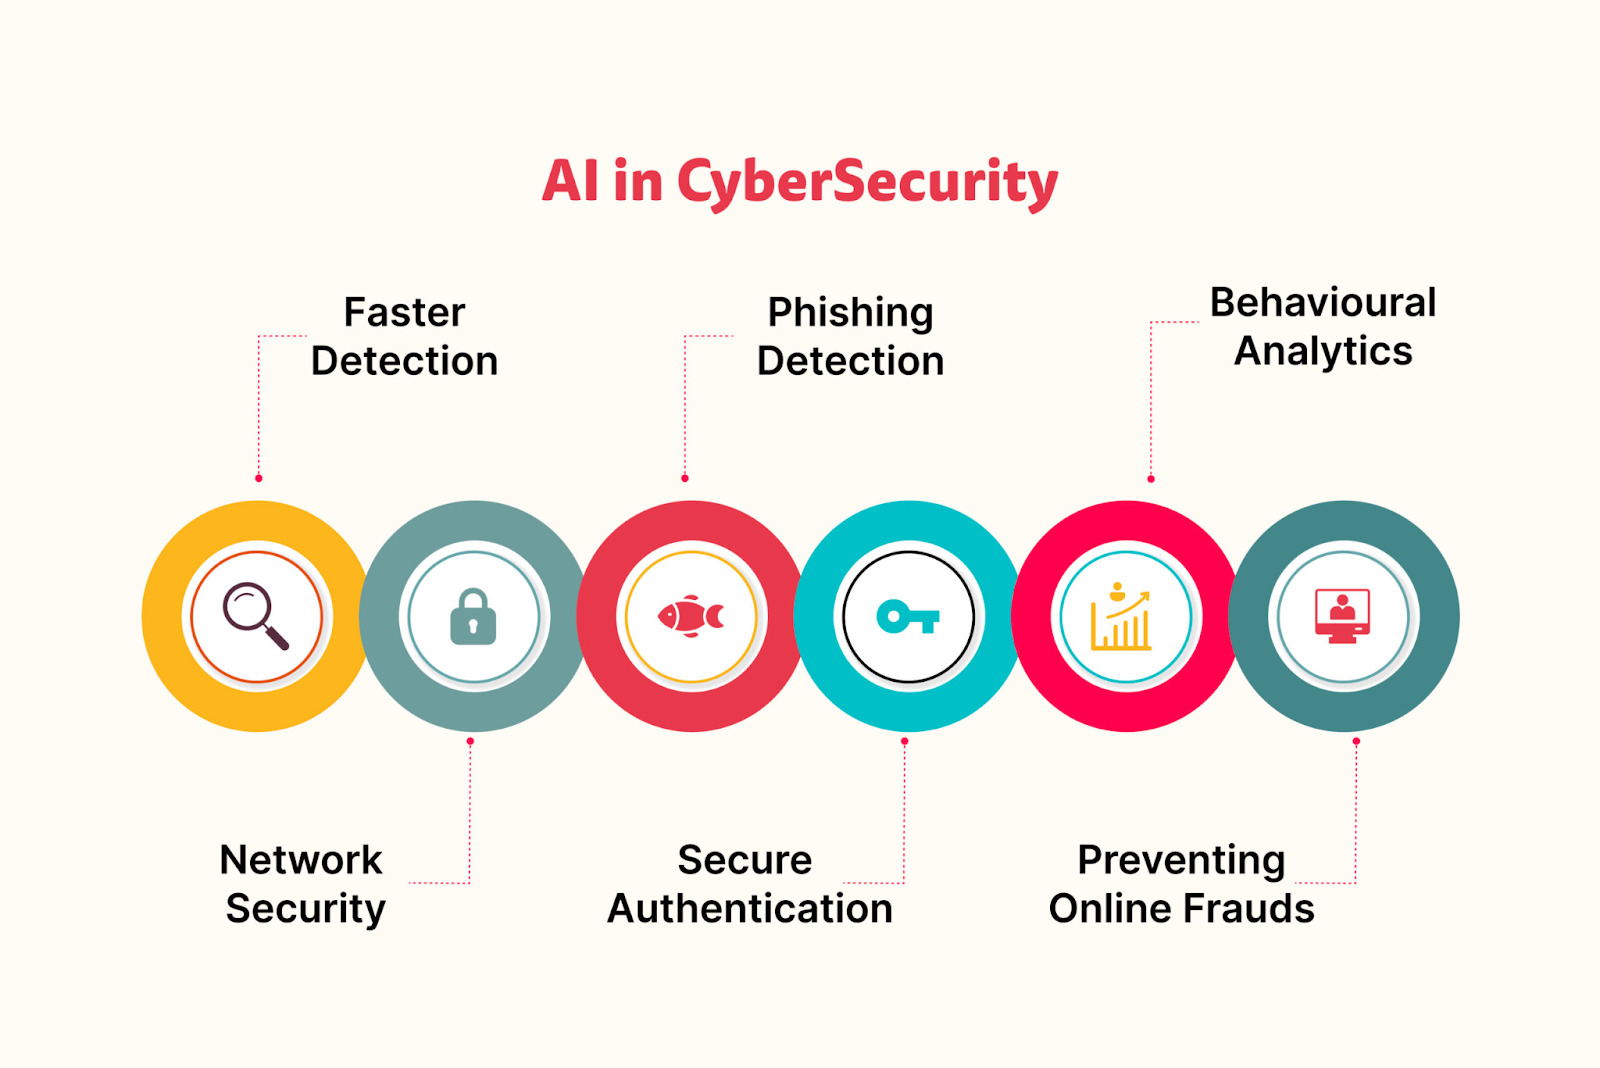 ai cybersecurity; AI helps with faster detection, network security, phishing detection, secure authentication, behavioral analytics, and preventing online frauds